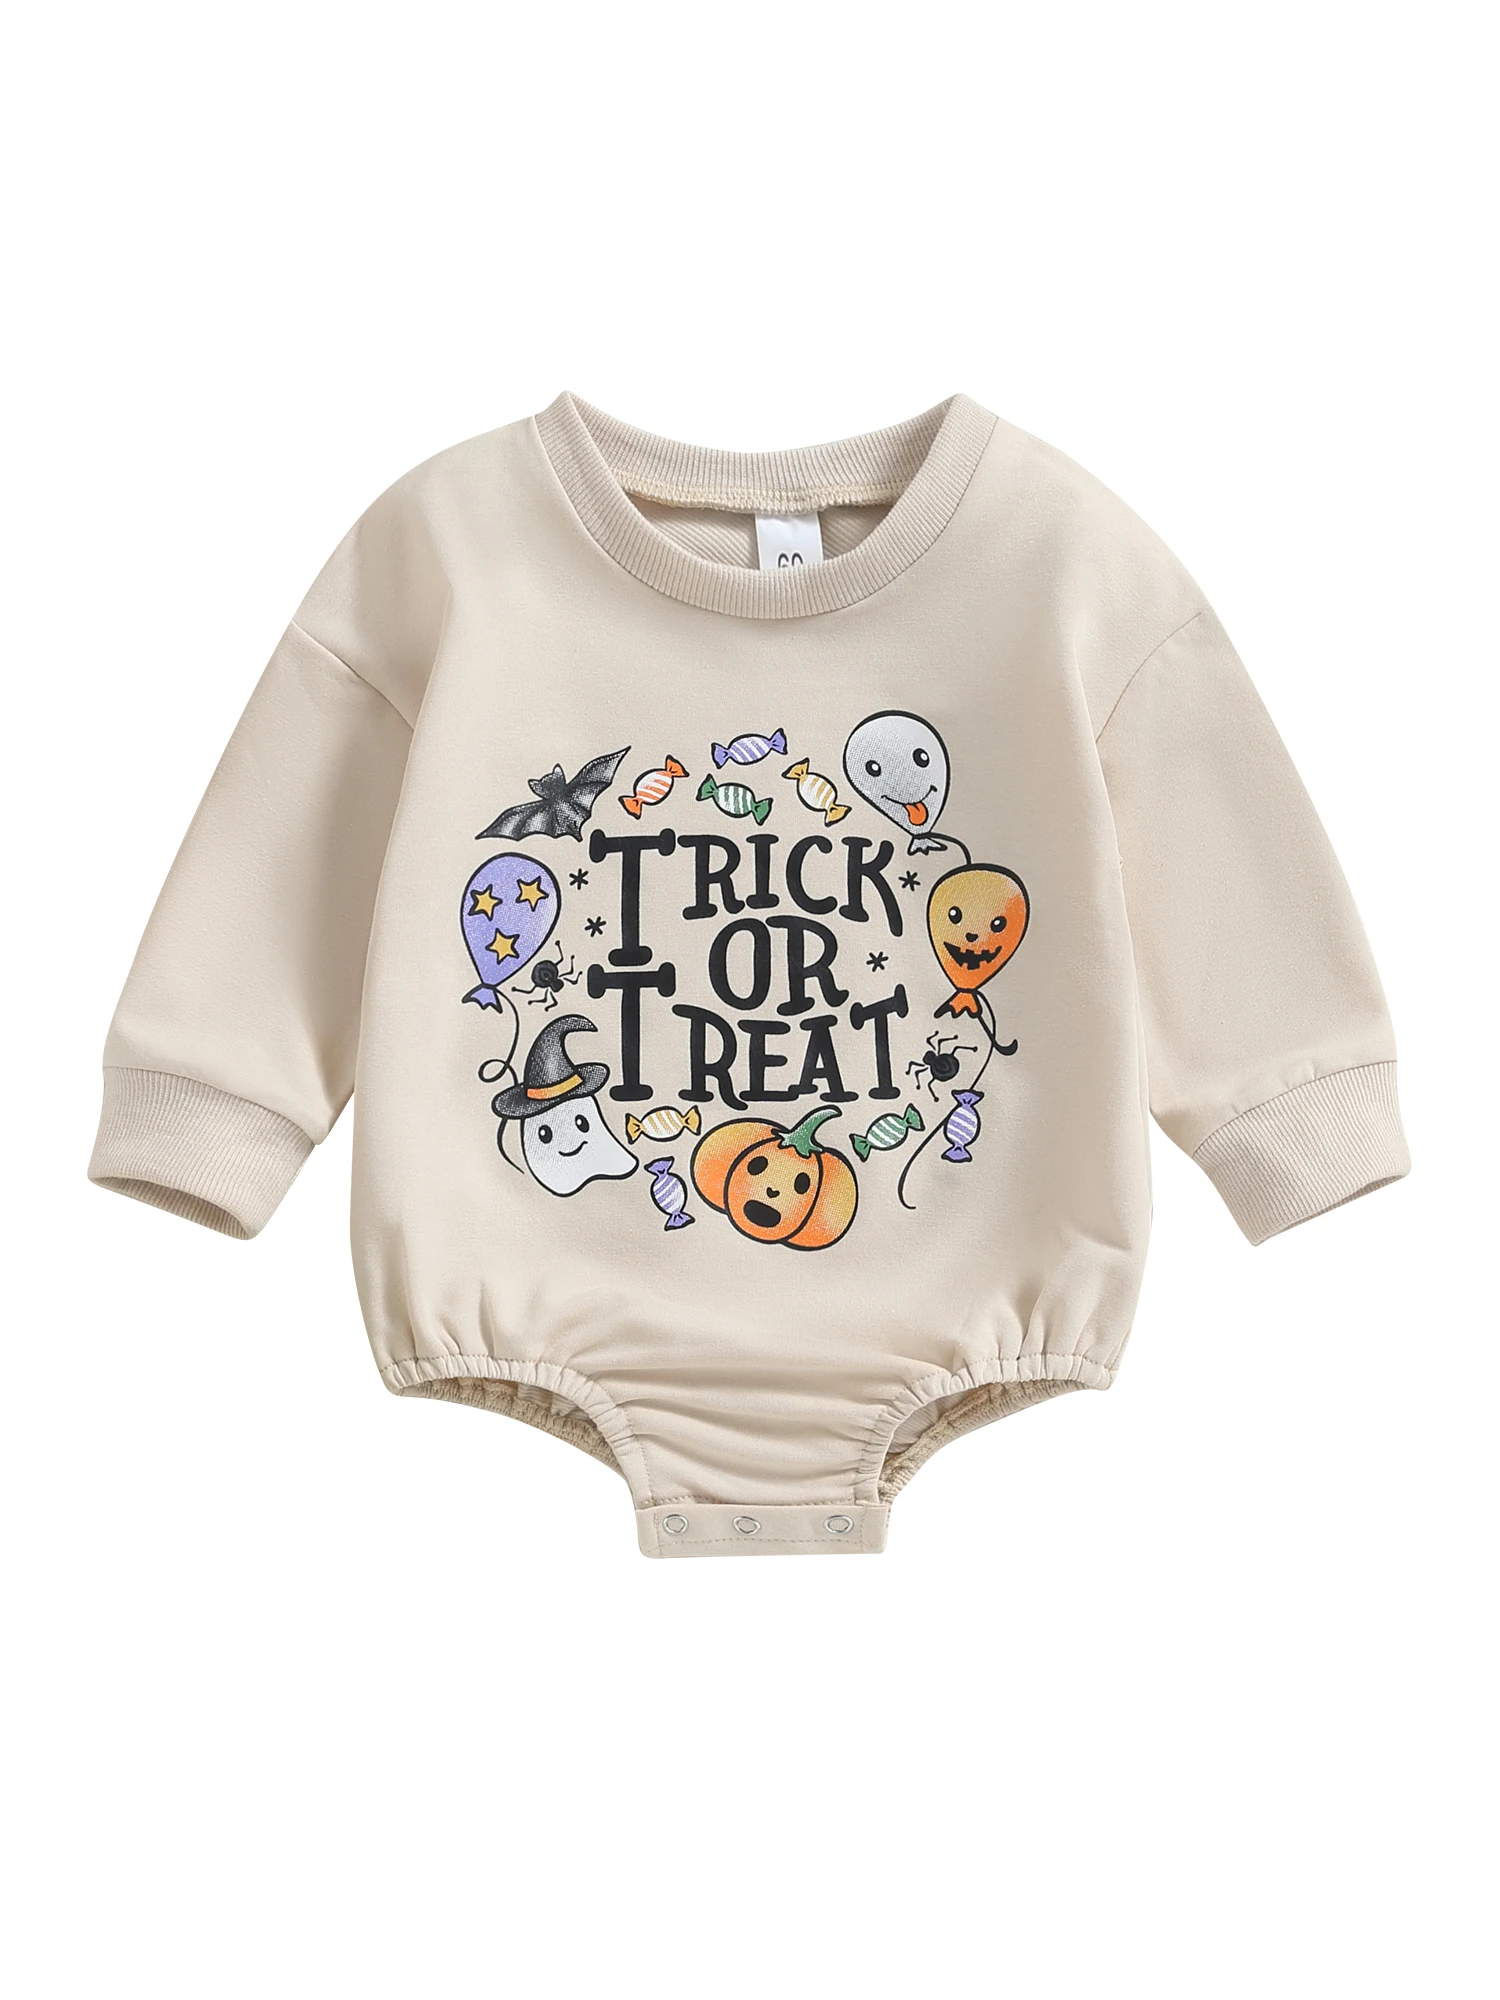 

Cute Halloween-themed Baby Romper Adorable Long Sleeve Pumpkin Print Bodysuit for Boys and Girls Perfect Fall Outfit